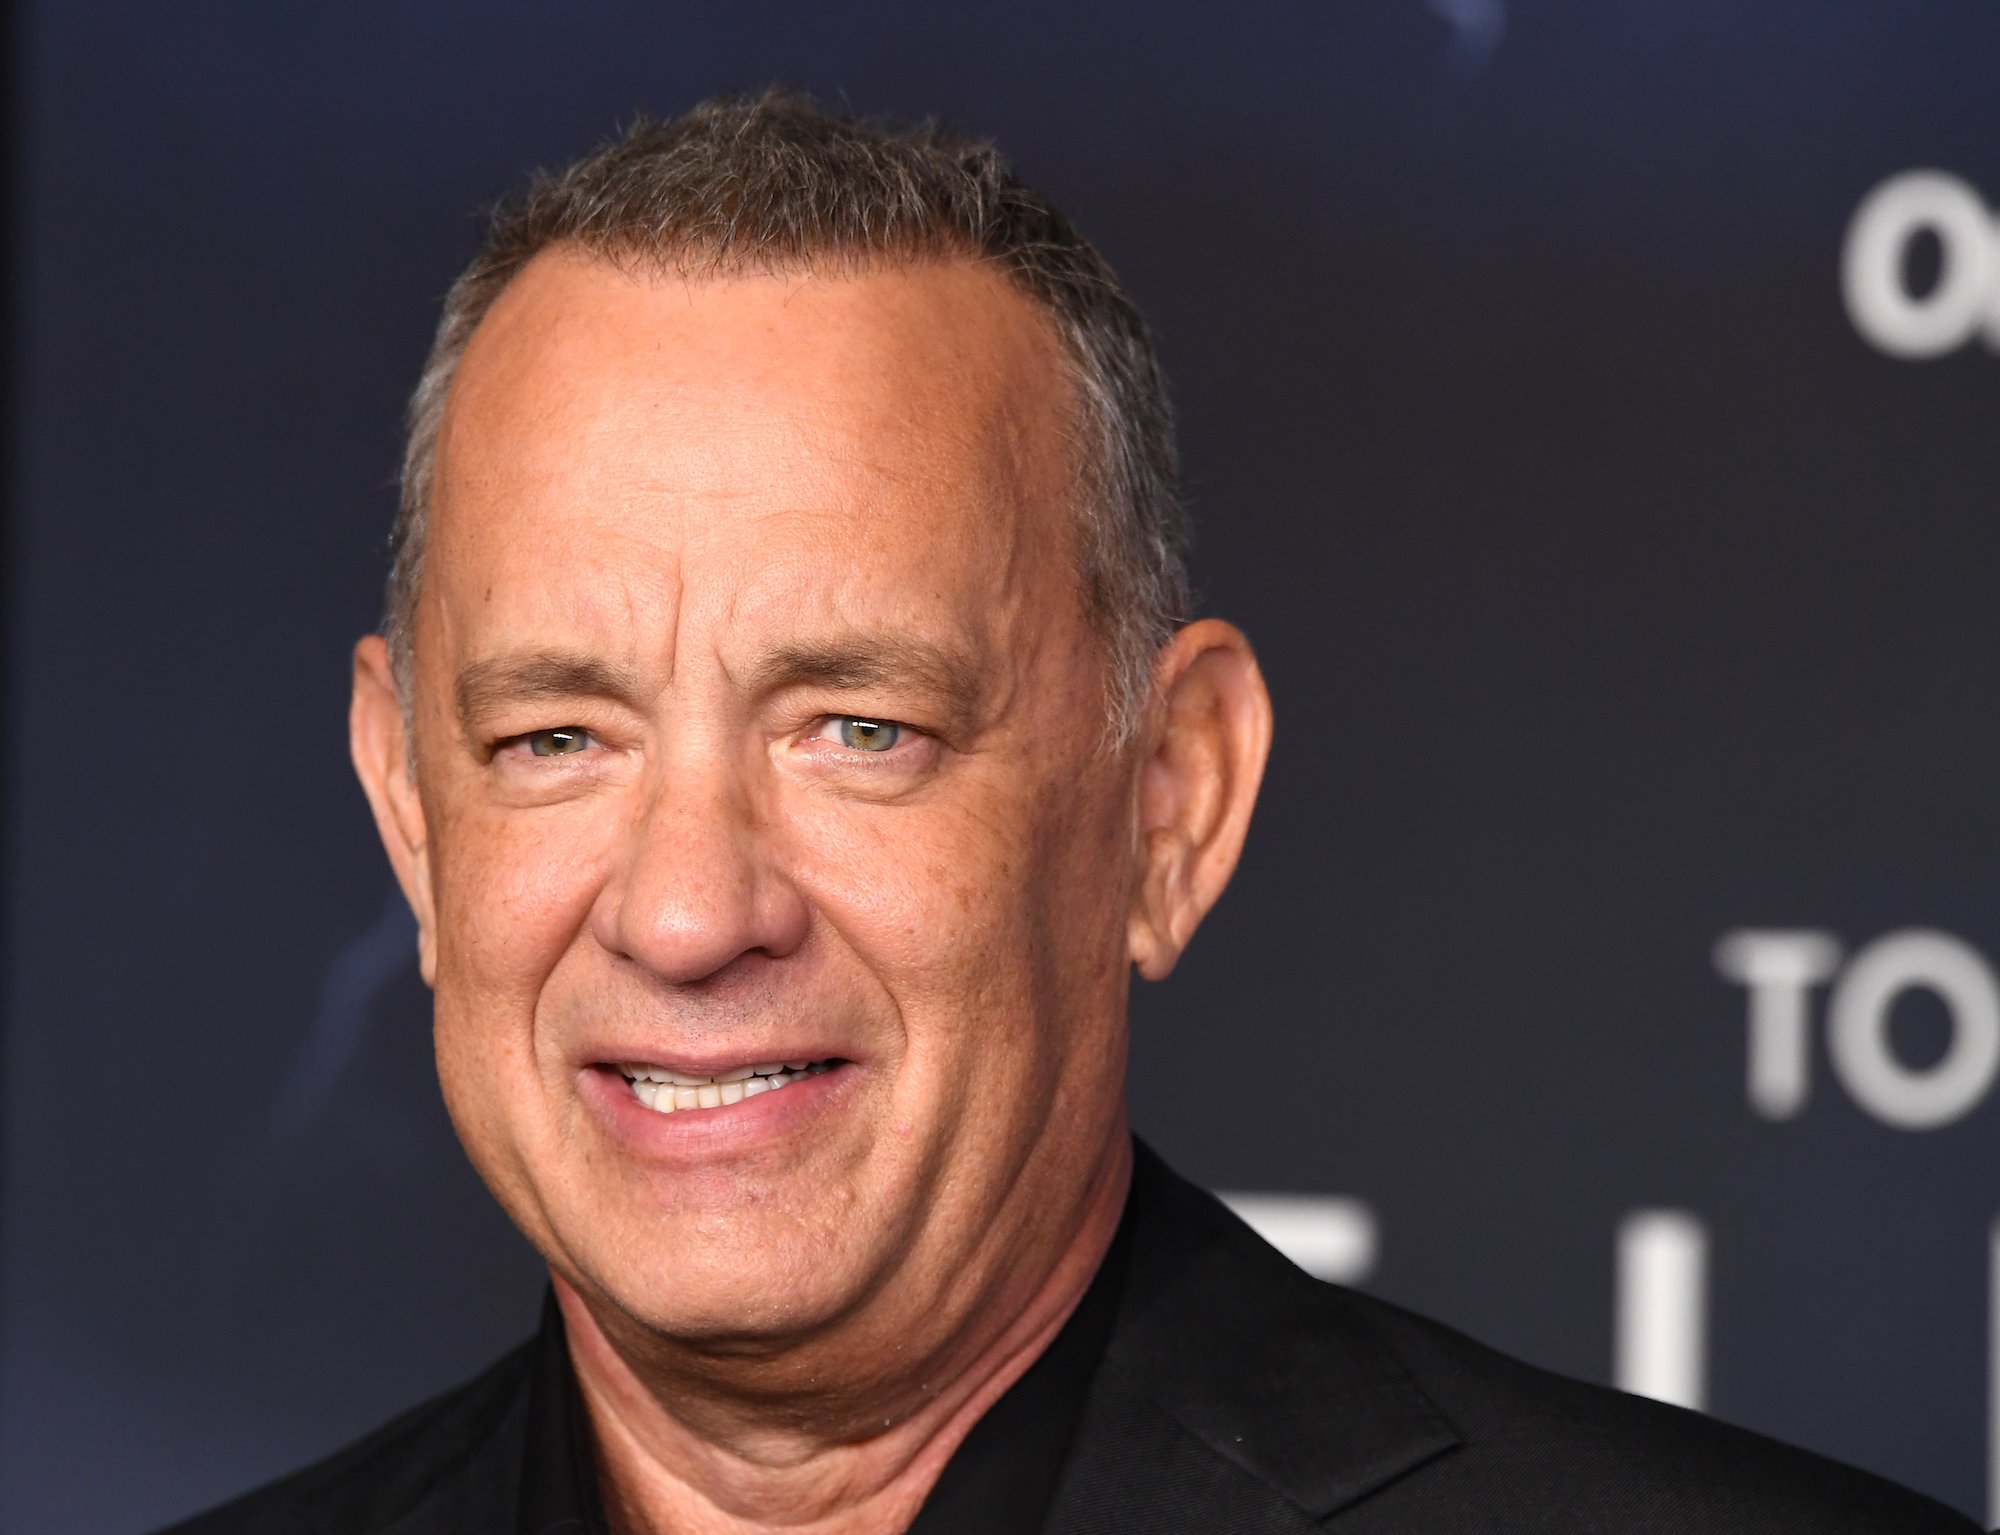 Future MCU star Tom Hanks on the red carpet for Finch